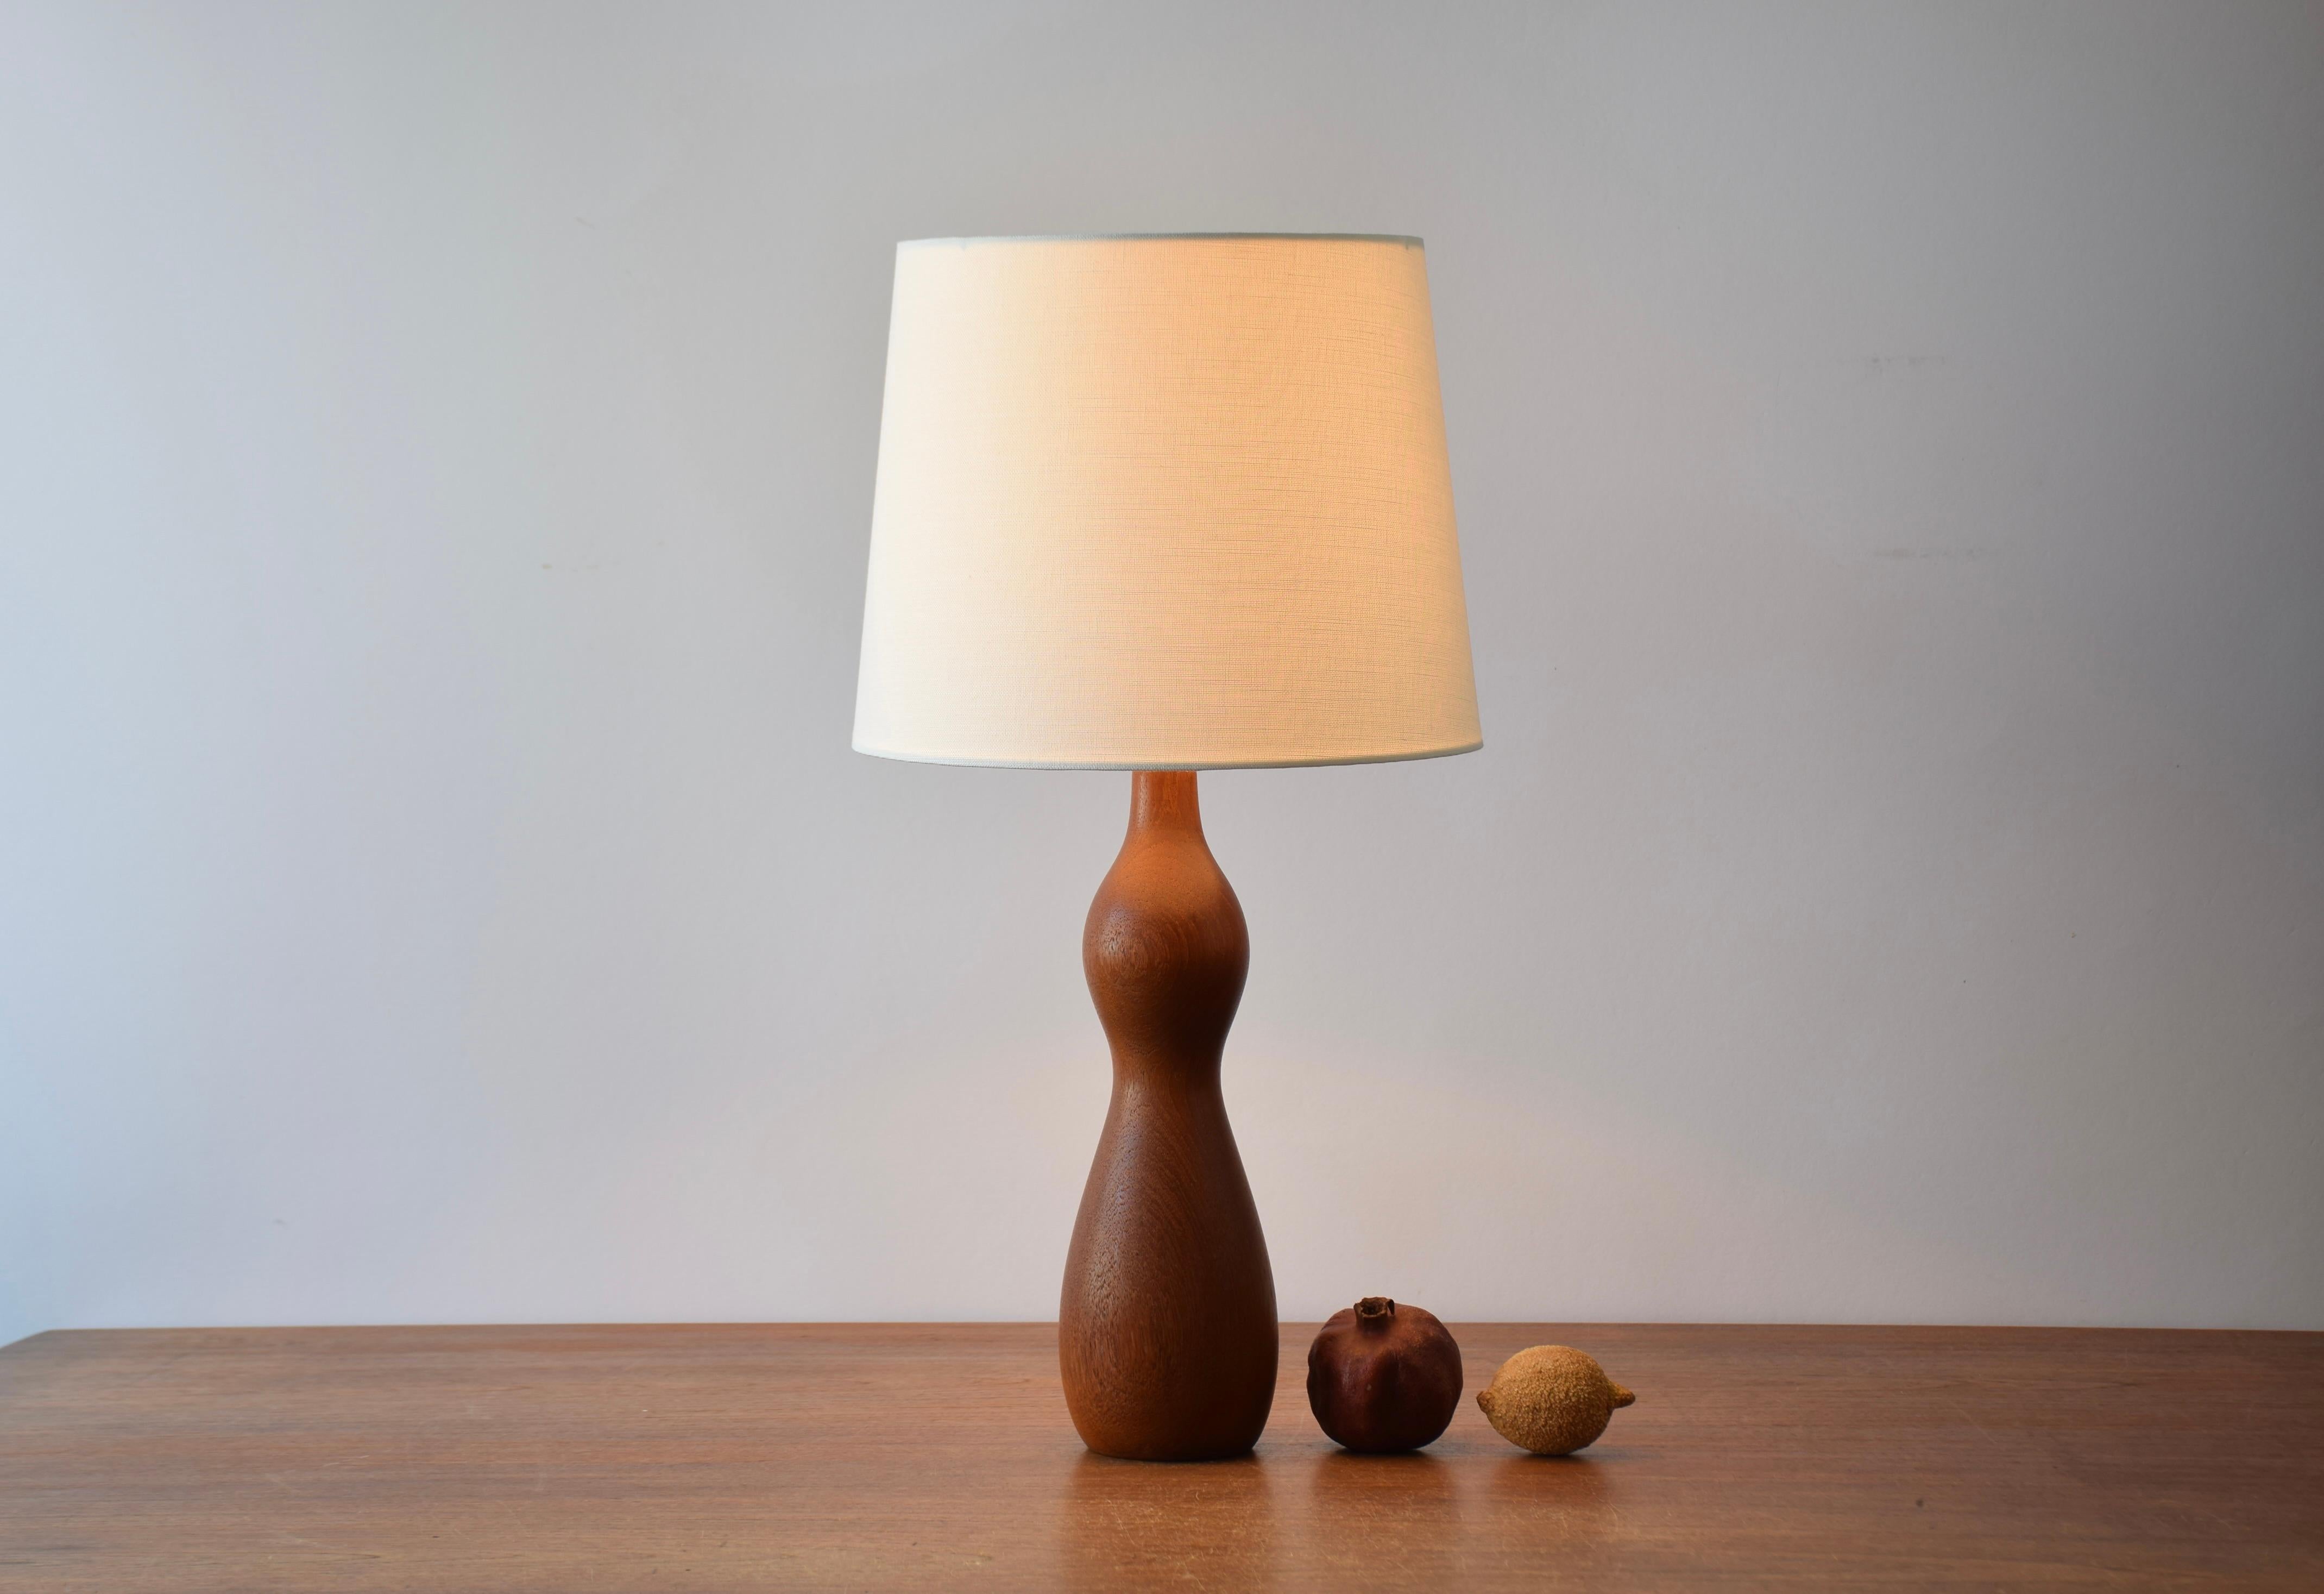 Original Scandinavian Mid-century table lamp made from turned teak.
Made circa 1960s.

The teak has a beautiful warm color and a lovely grain.

Included is a new lamp shade designed and made in Denmark. It is made of woven fabric with some